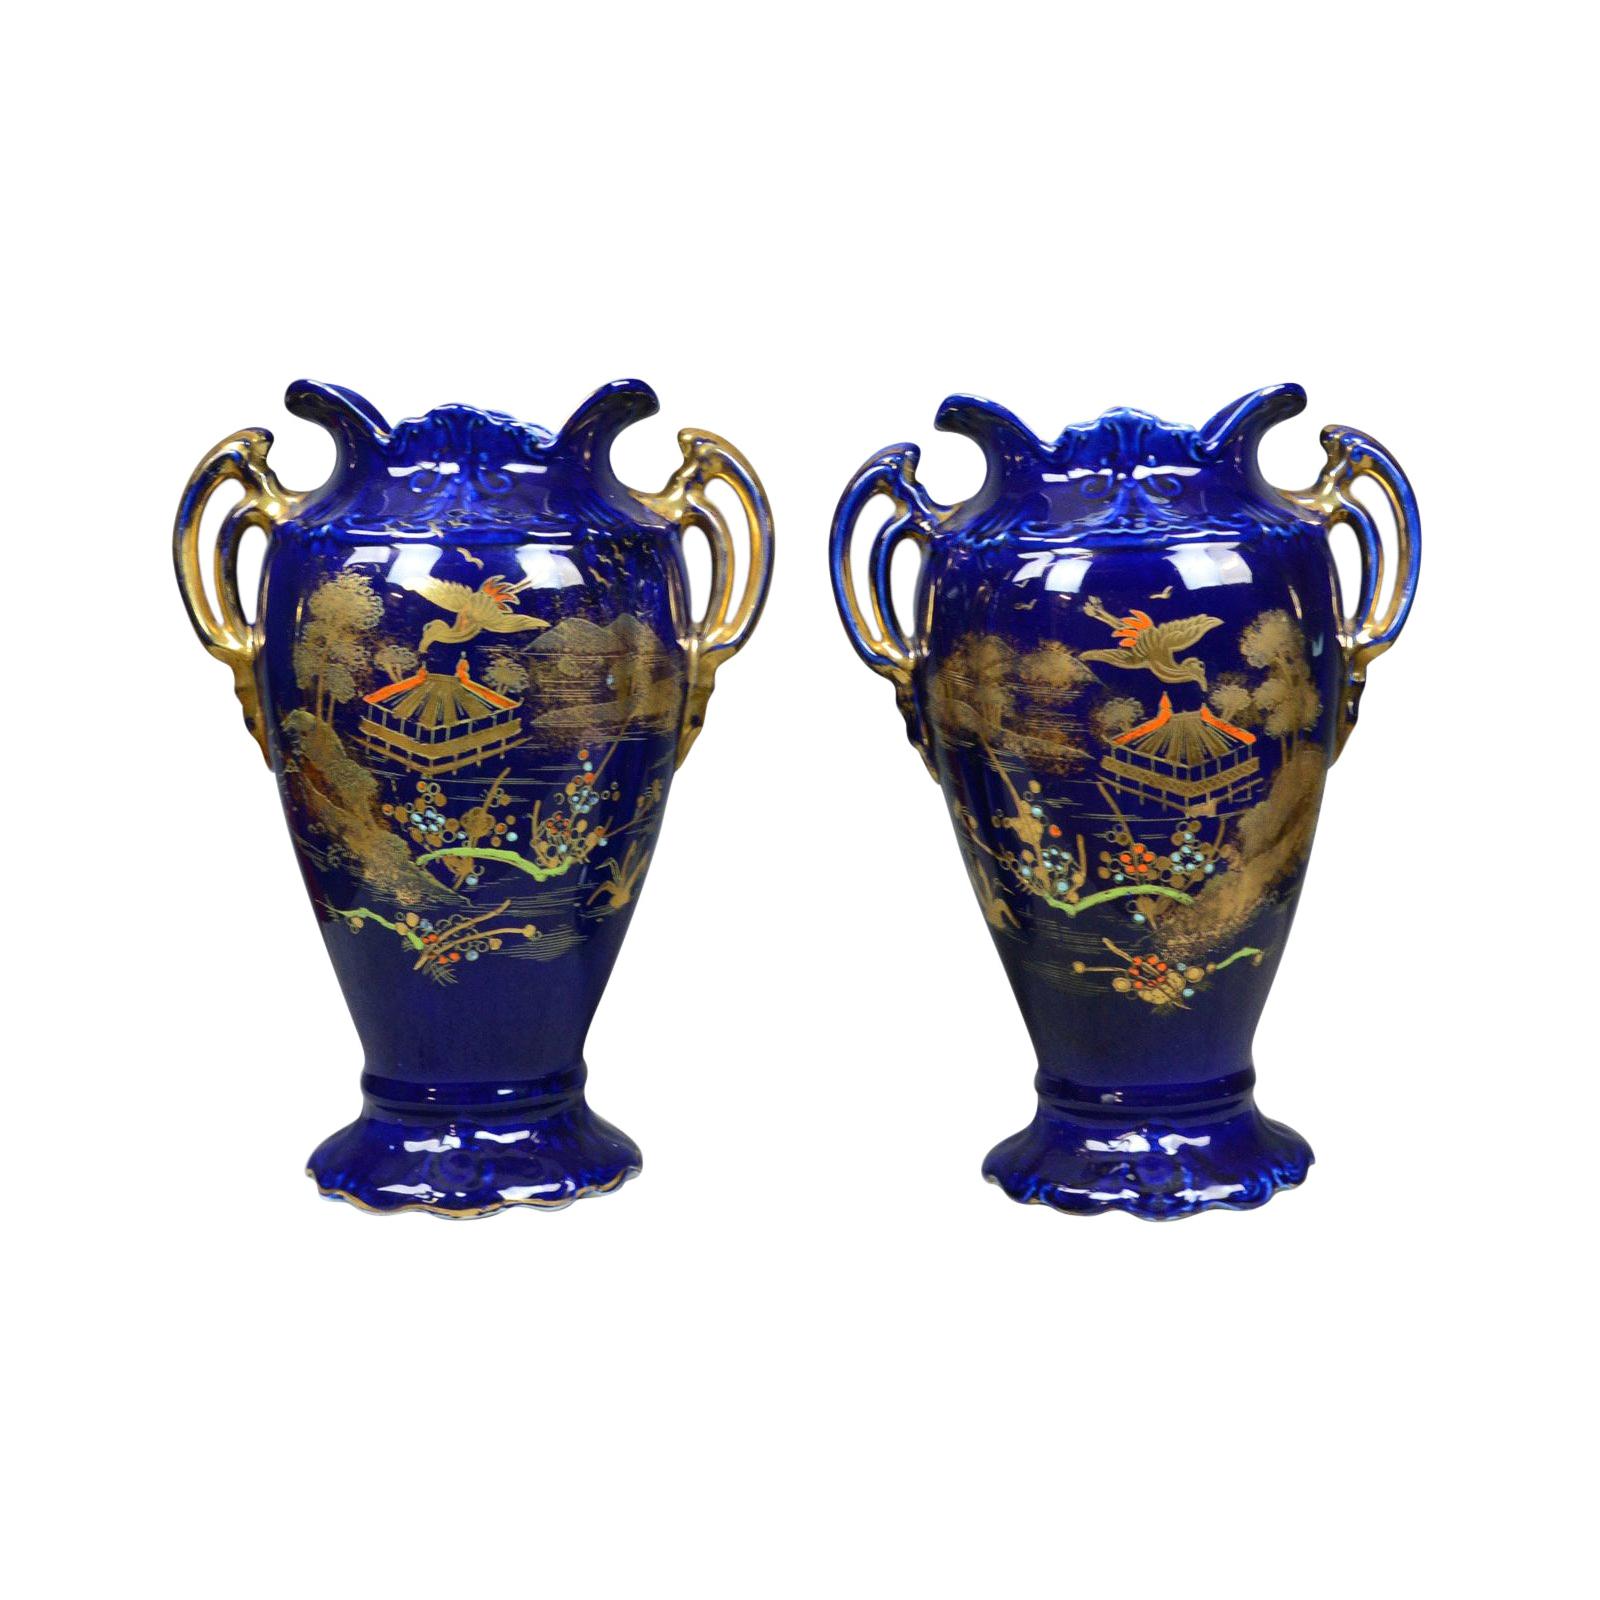 Pair of Decorative Baluster Vases, Ceramic Urns, Gold, Blue, Late 20th Century For Sale